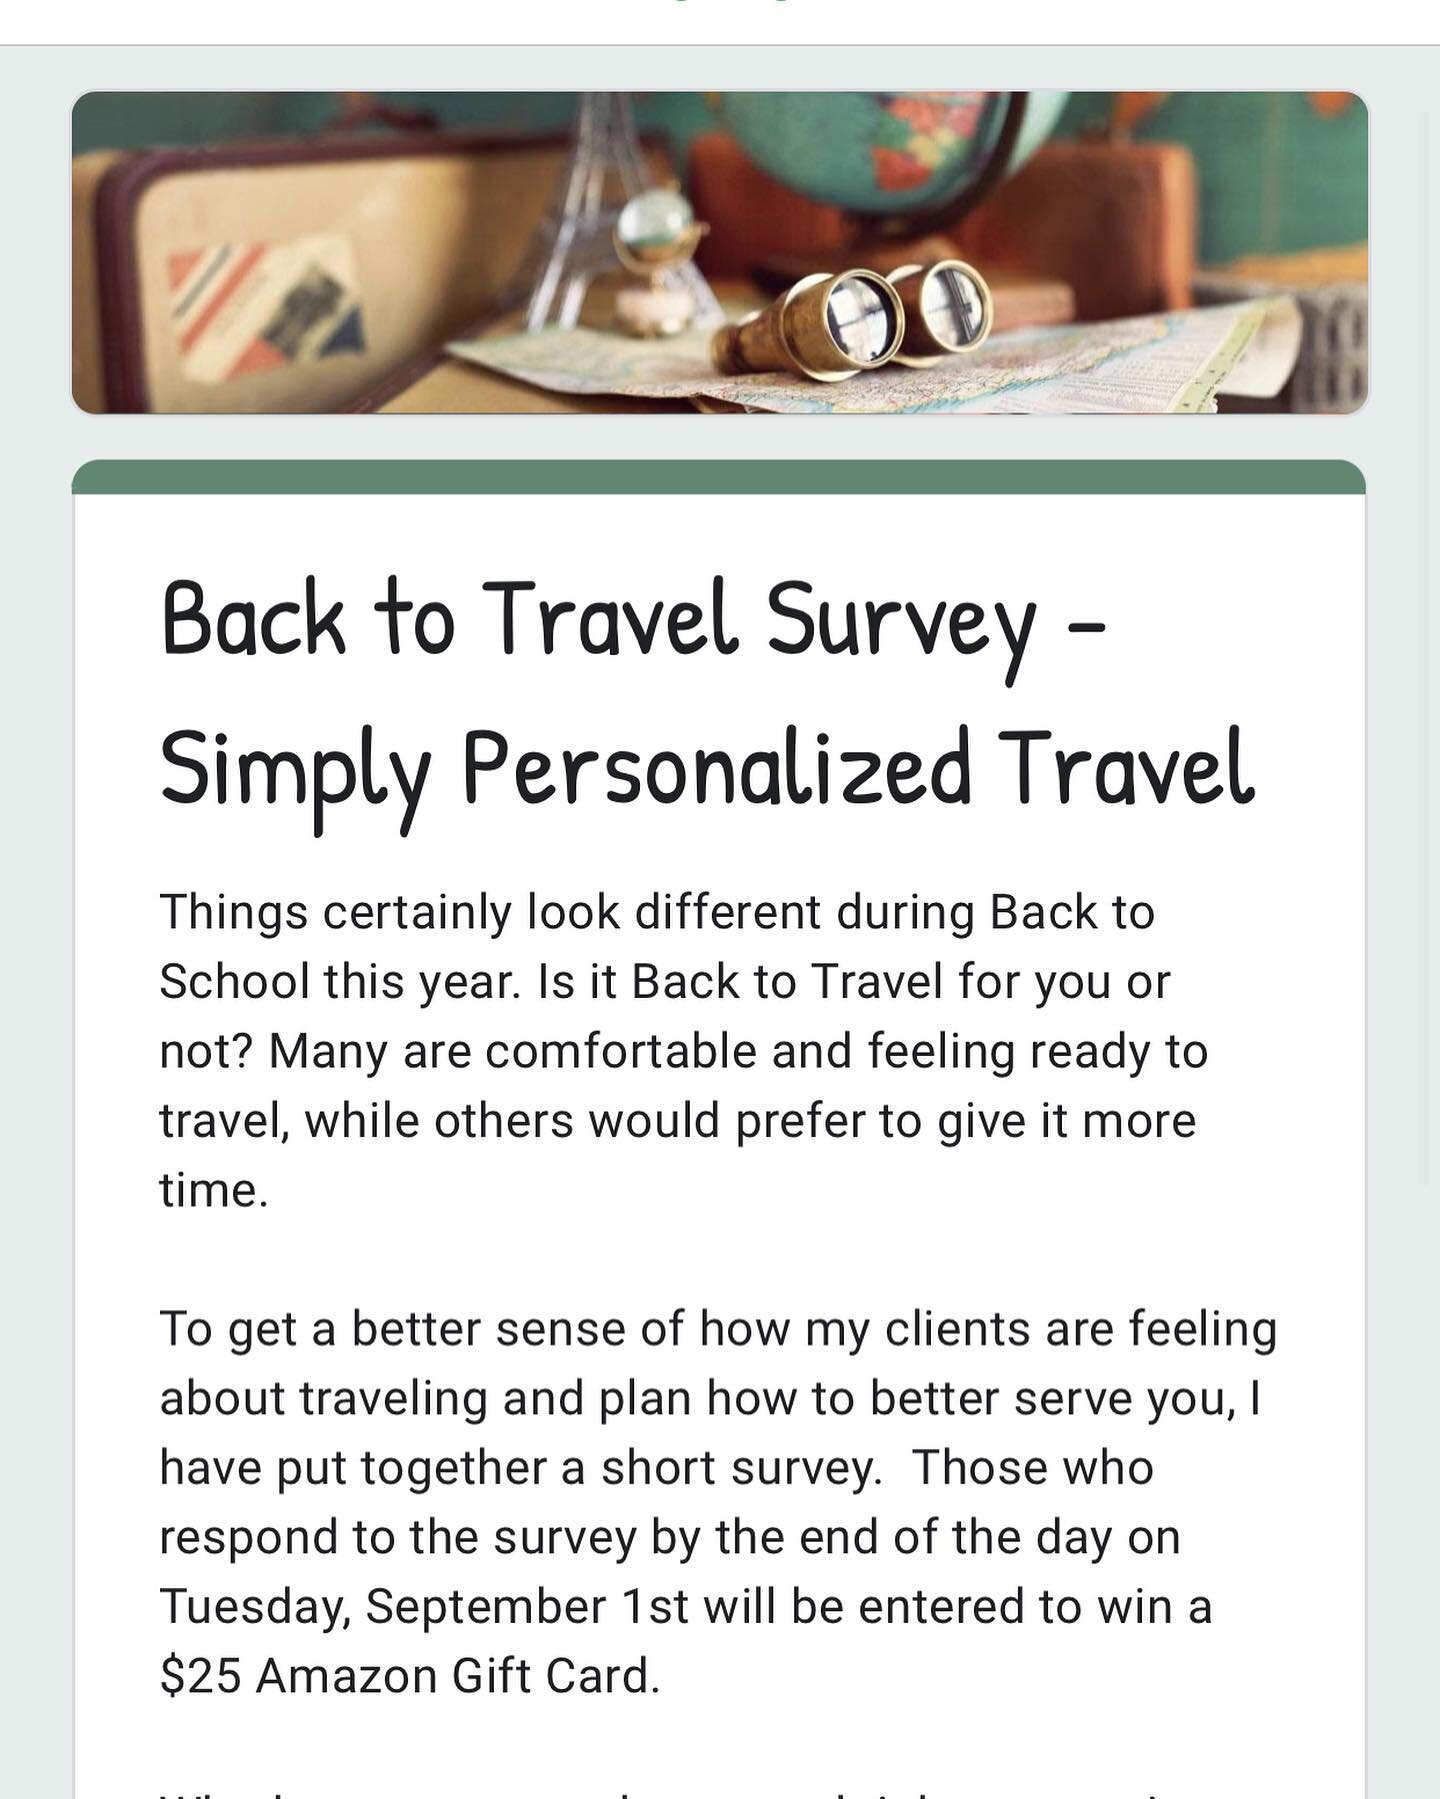 Are you ready to travel, or just dreaming about it? ✈️

To get a better sense of how my clients are feeling about traveling, I have put together a short, 2 question survey. Click the link in my bio or head over to Facebook for the direct link! ☑️

Th